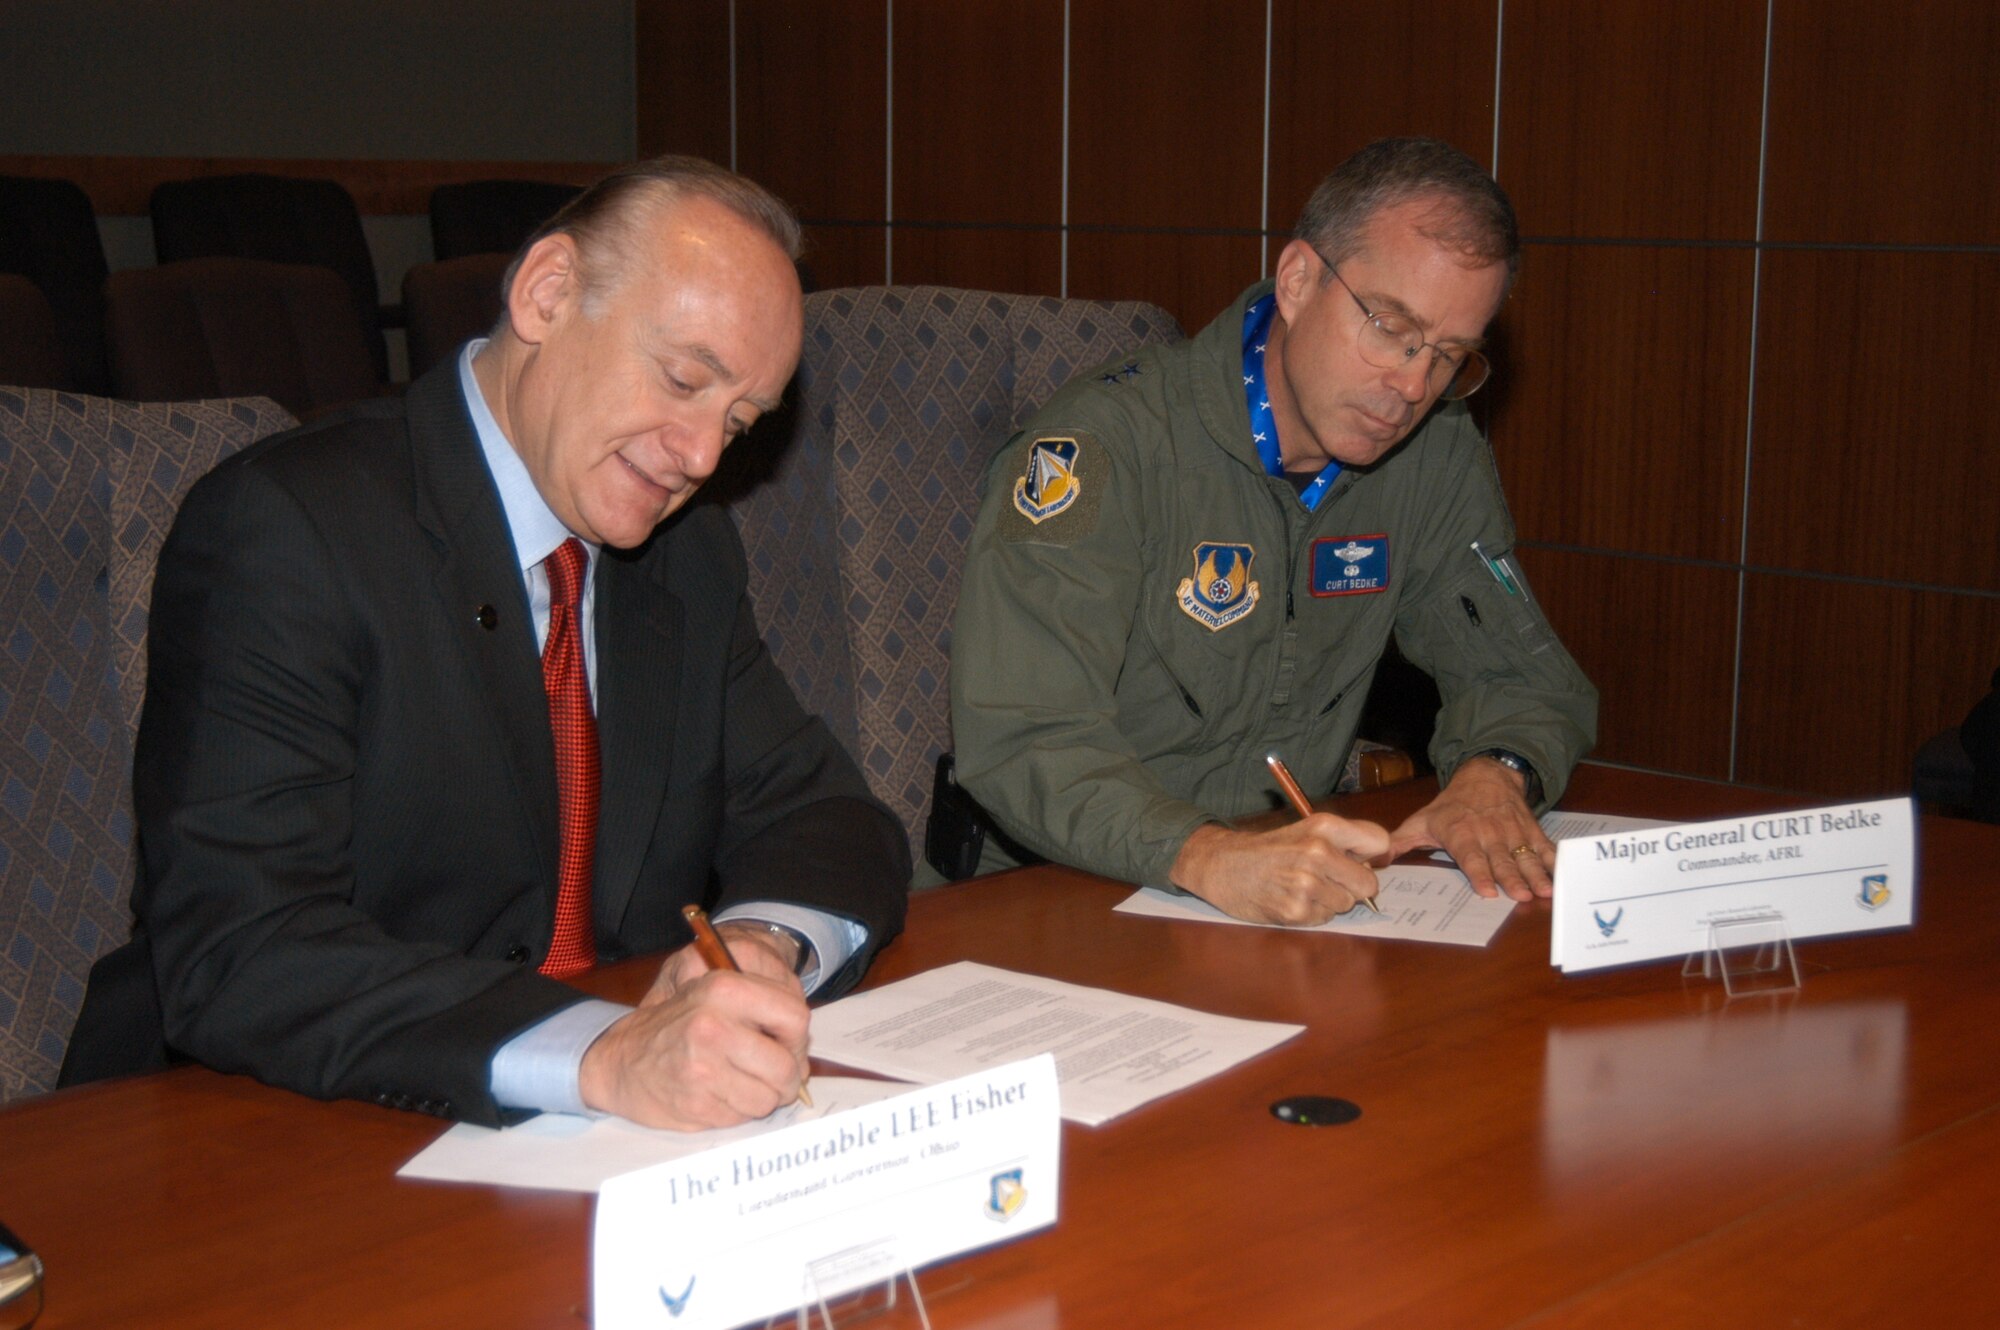 Lt. Governor Lee Fisher and Air Force Research Laboratory commander Maj. Gen. Curtis Bedke, sign the Memorandum of Understanding which will encourage collaboration for Air Force research and economic growth. (Air Force photo by Jeremy Patton) 